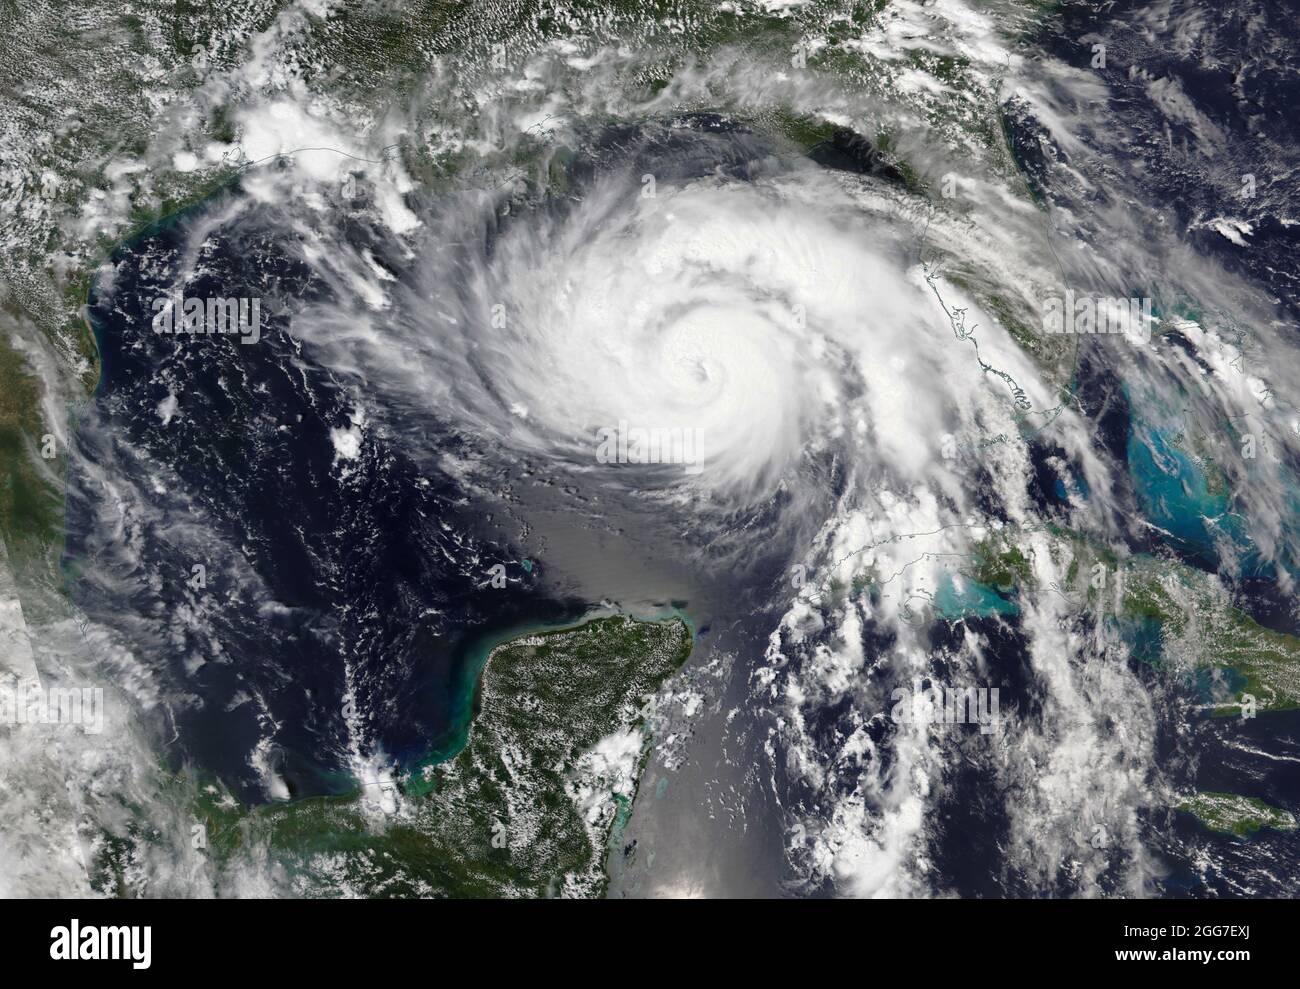 GULF OF MEXICO - 28 August 2021 - Hurricane Ida as viewed from space by NASA MODIS satellites on 28 August 2021. Hurricane Ida made landfall in Louisi Stock Photo